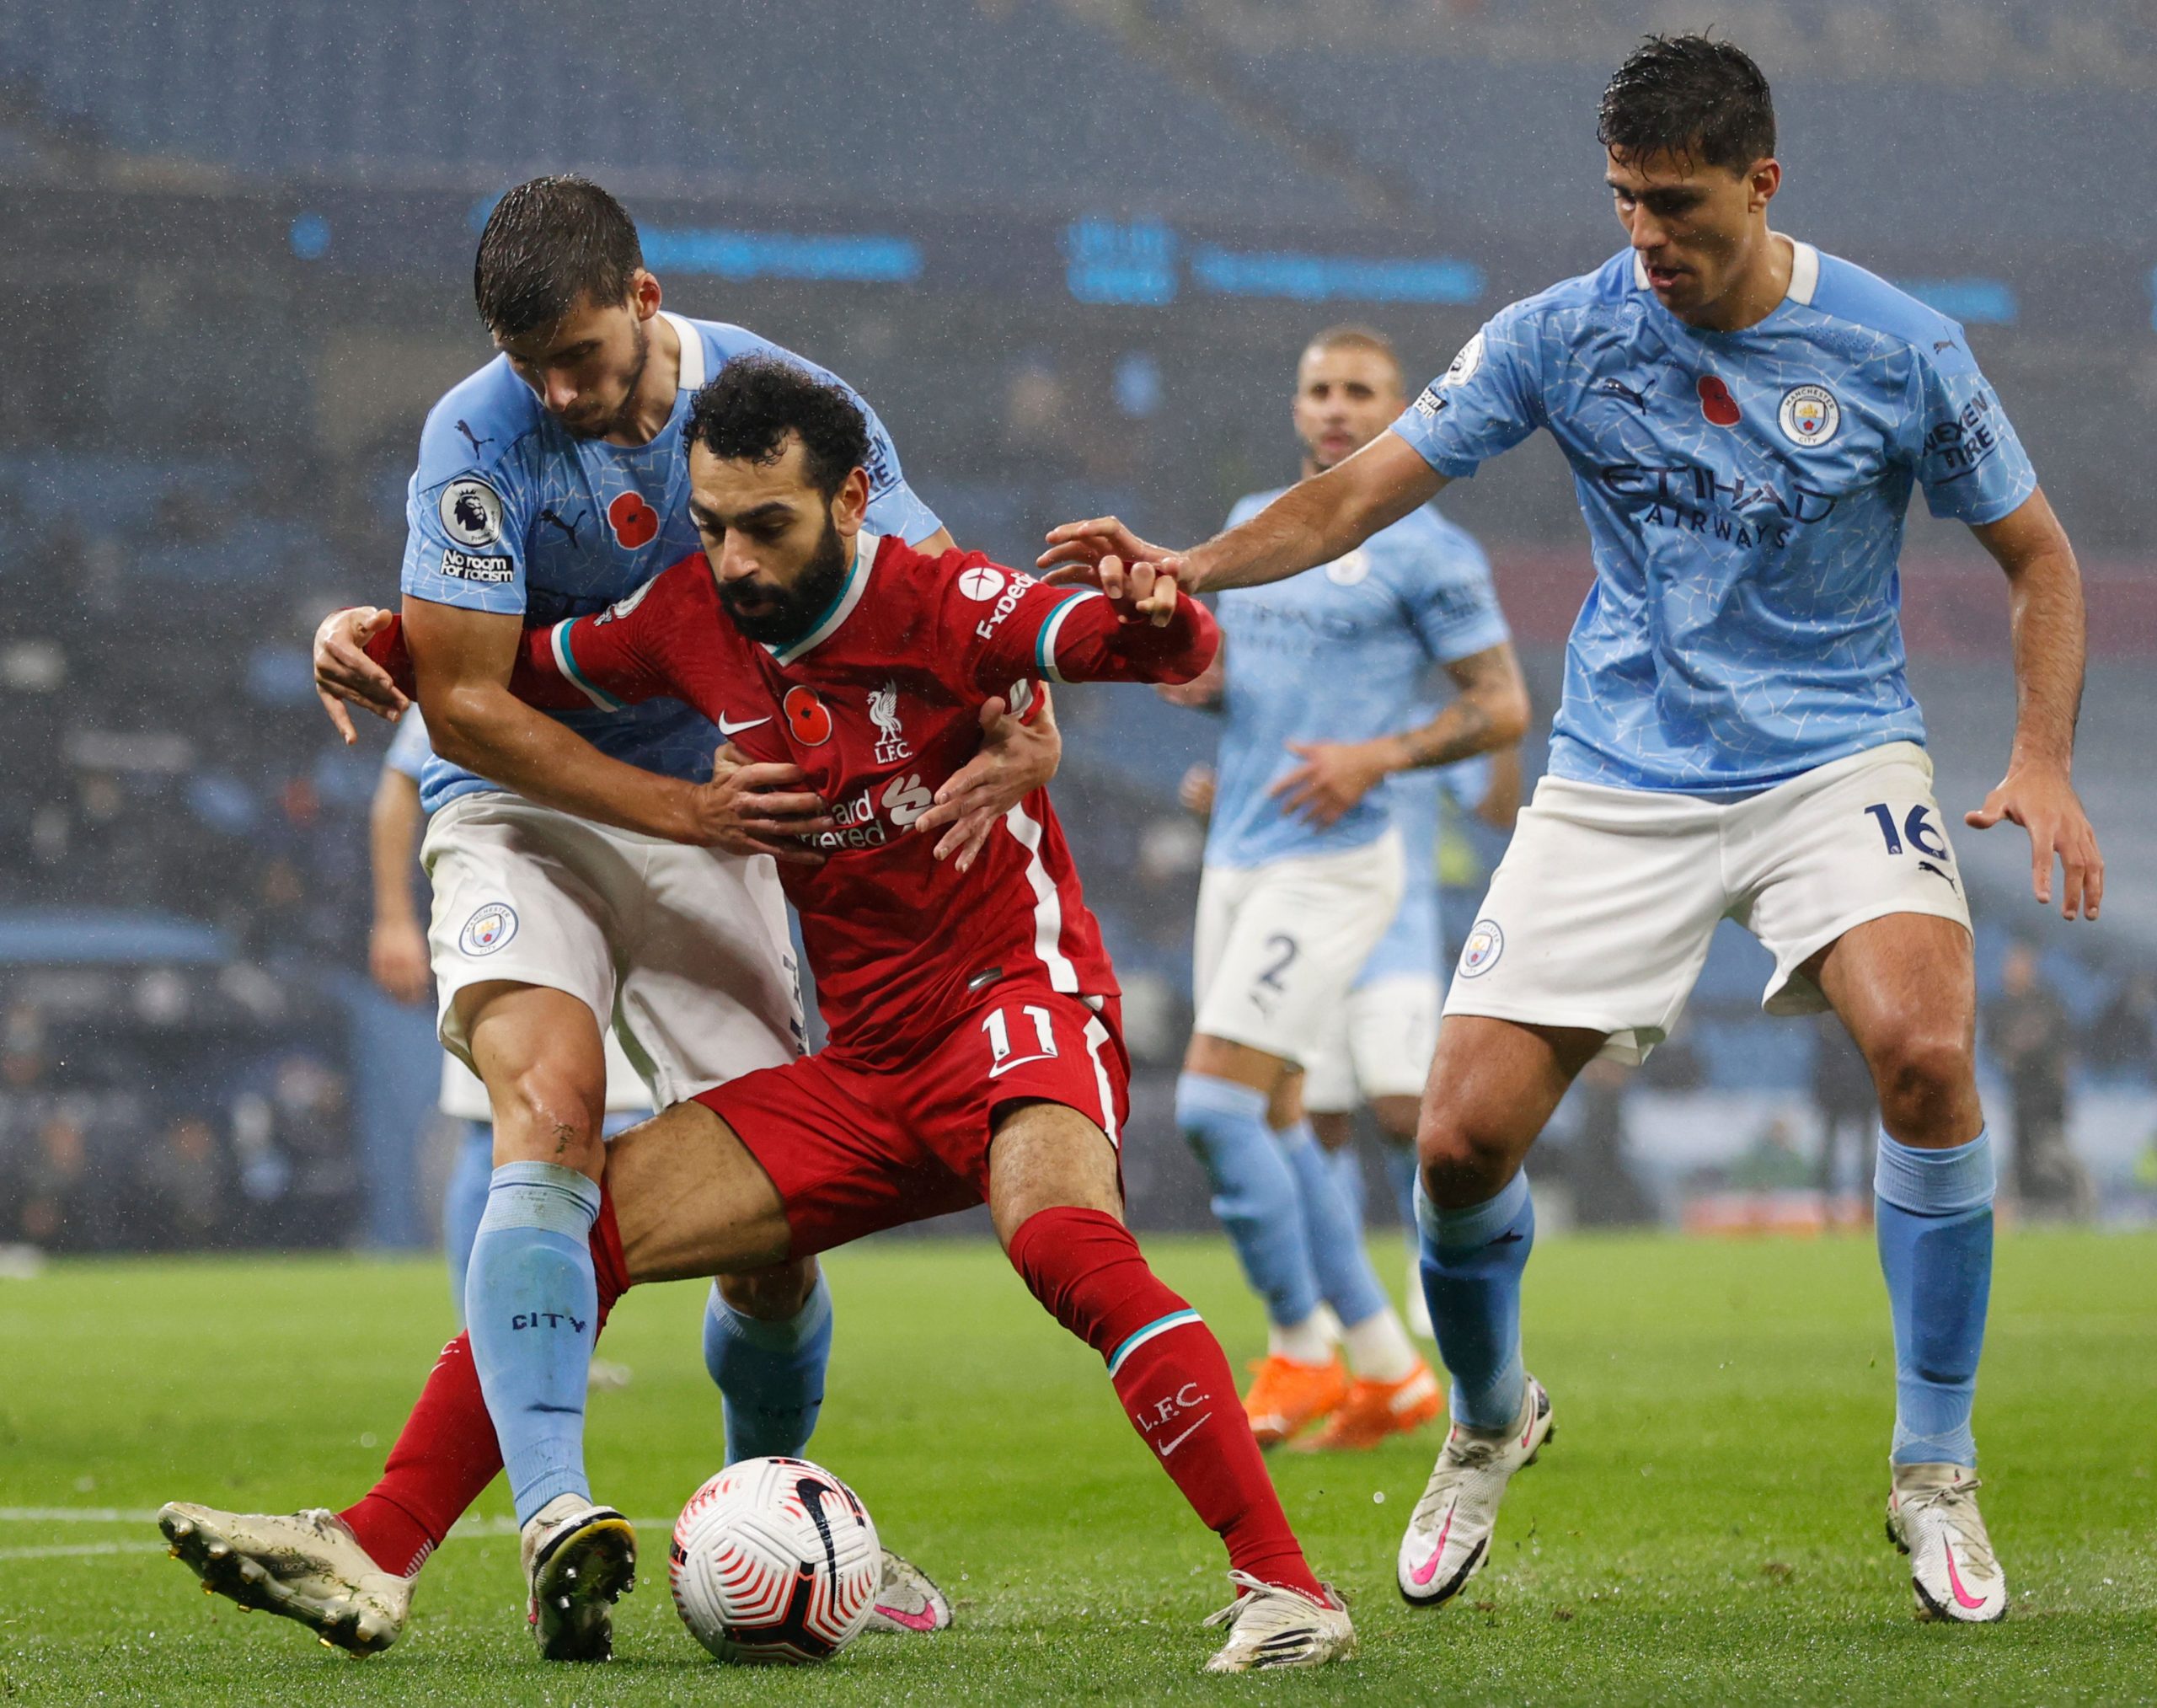 Liverpool's Egyptian midfielder Mohamed Salah (C) battles with Manchester City's Portuguese defender Ruben Dias (L) and Manchester City's Spanish midfielder Rodri (R) during the English Premier League football match between Manchester City and Liverpool at the Etihad Stadium in Manchester, north west England, on November 8, 2020. (Photo by Clive Brunskill / POOL / AFP) / RESTRICTED TO EDITORIAL USE. No use with unauthorized audio, video, data, fixture lists, club/league logos or 'live' services. Online in-match use limited to 120 images. An additional 40 images may be used in extra time. No video emulation. Social media in-match use limited to 120 images. An additional 40 images may be used in extra time. No use in betting publications, games or single club/league/player publications. /  (Photo by CLIVE BRUNSKILL/POOL/AFP via Getty Images)